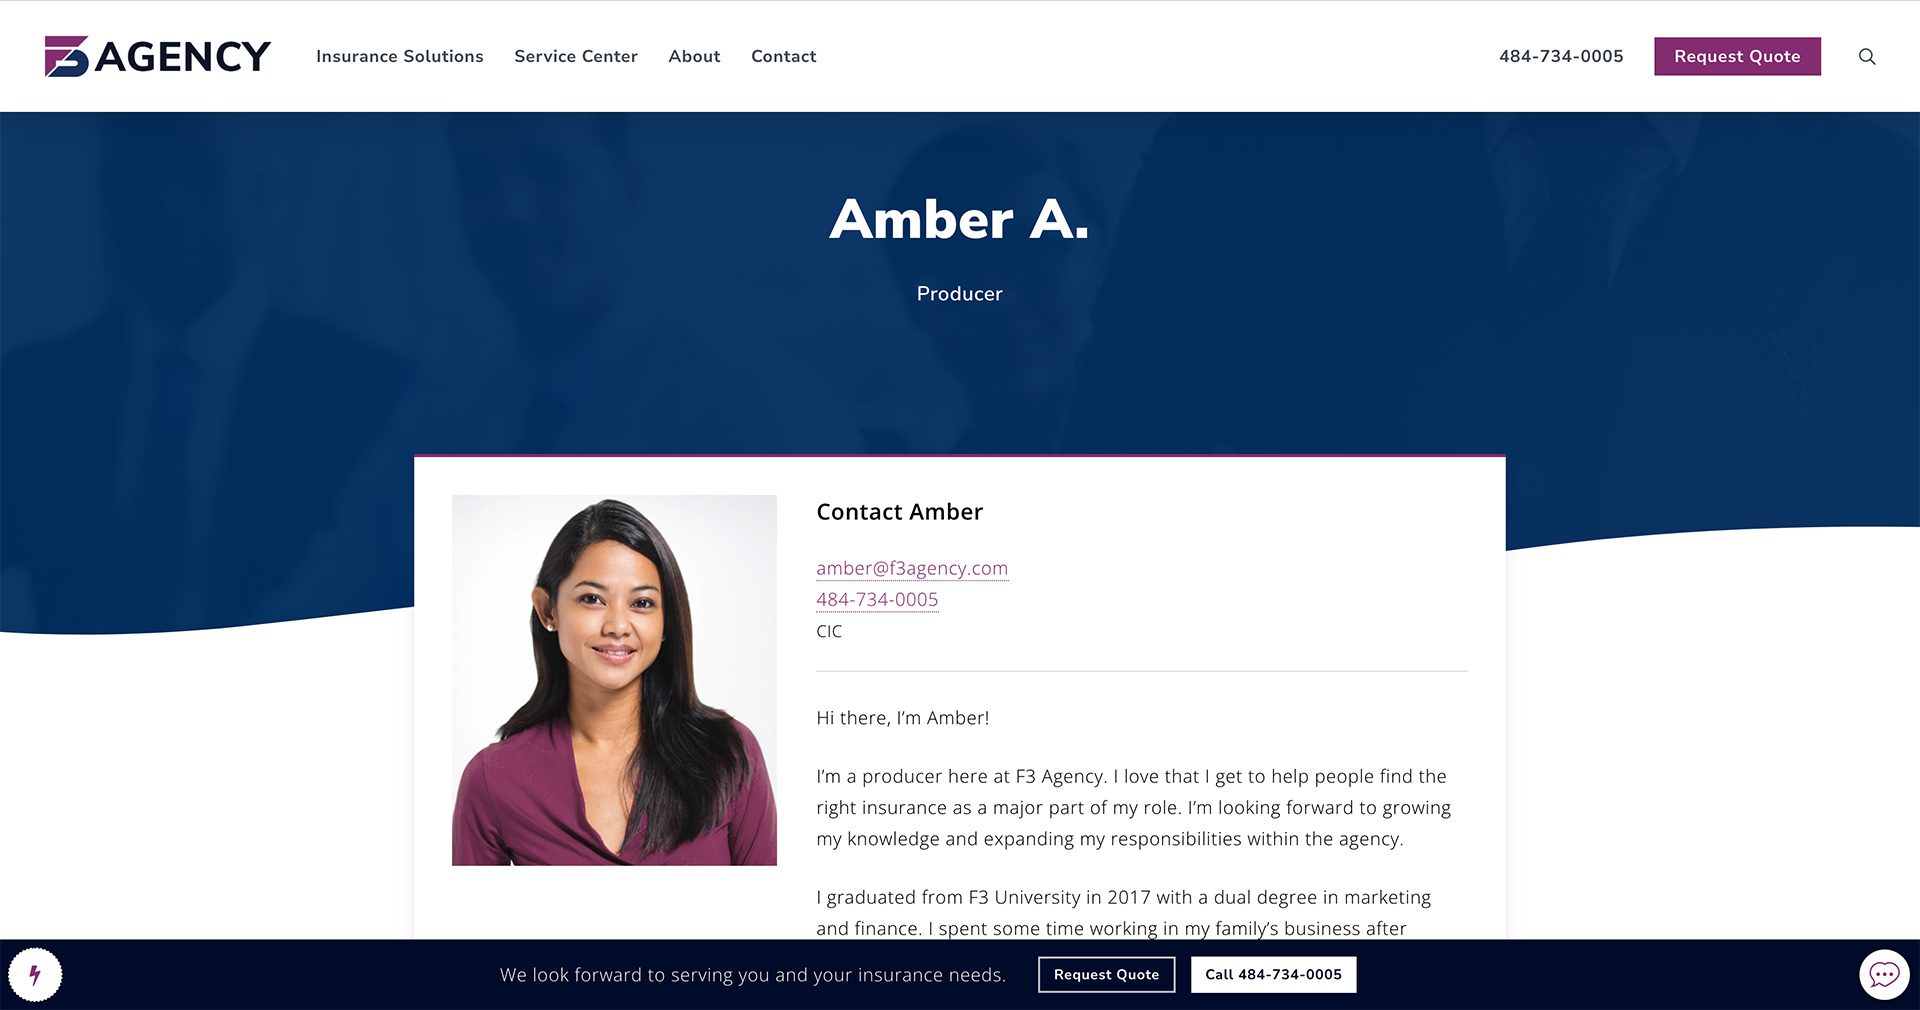 Resource - How to Write a Team Member Bio for Insurance Agency Websites - Team Members